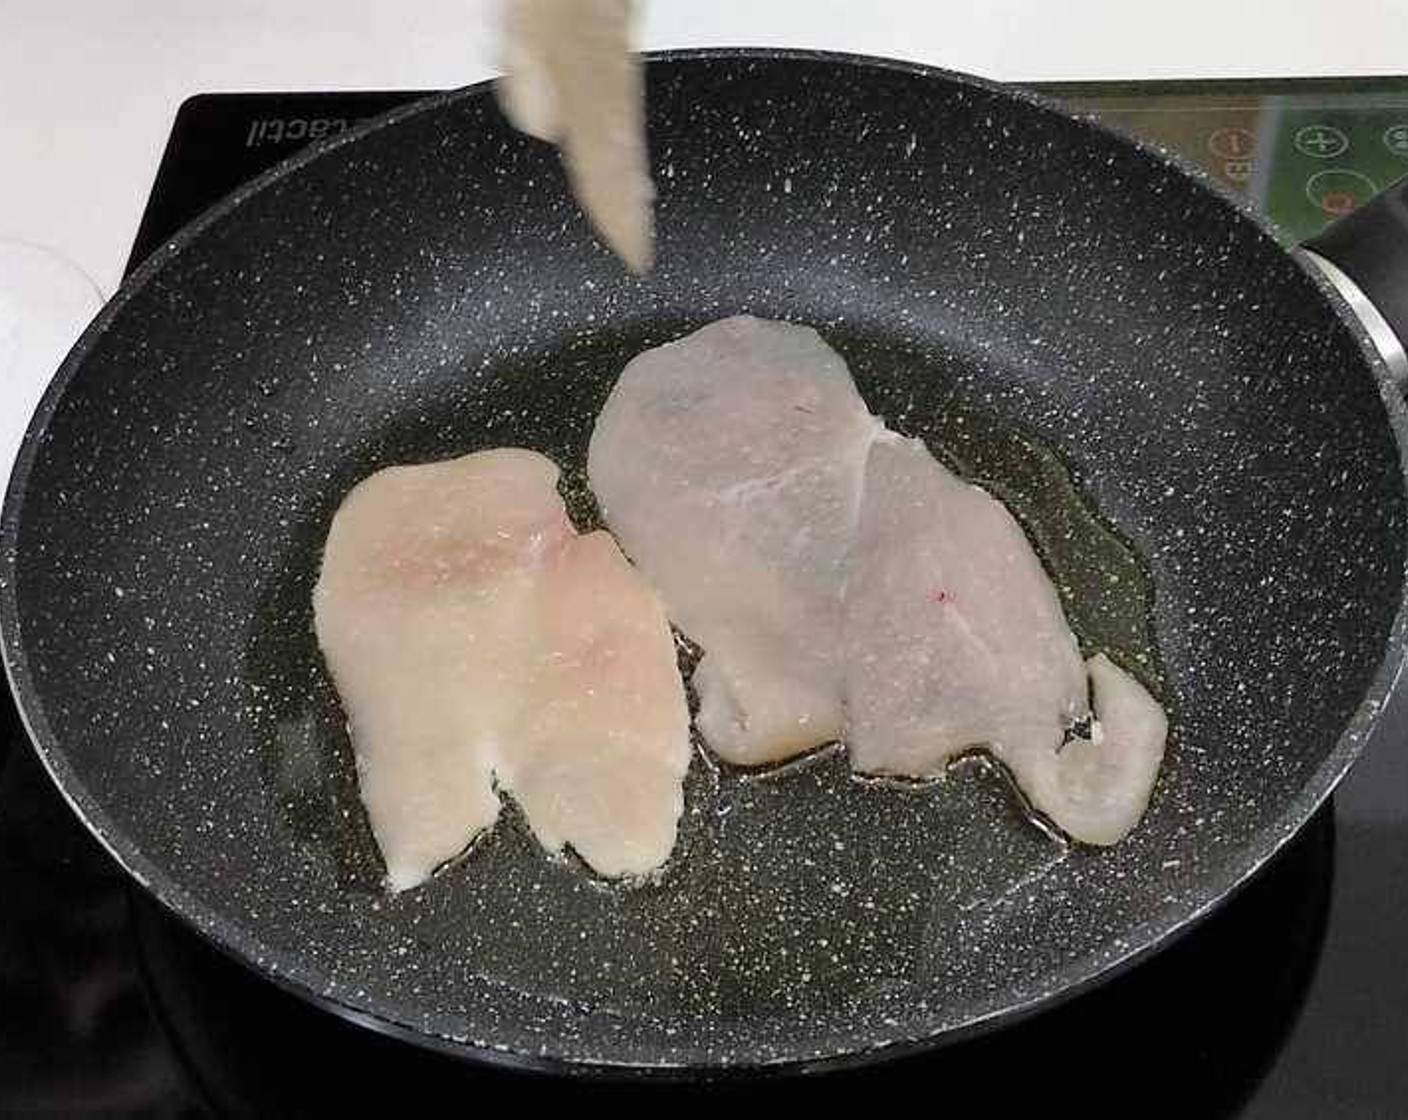 step 1 Start by seasoning with Salt (to taste) and pan-frying the Boneless, Skinless Chicken Breasts (2) in some Olive Oil (as needed).